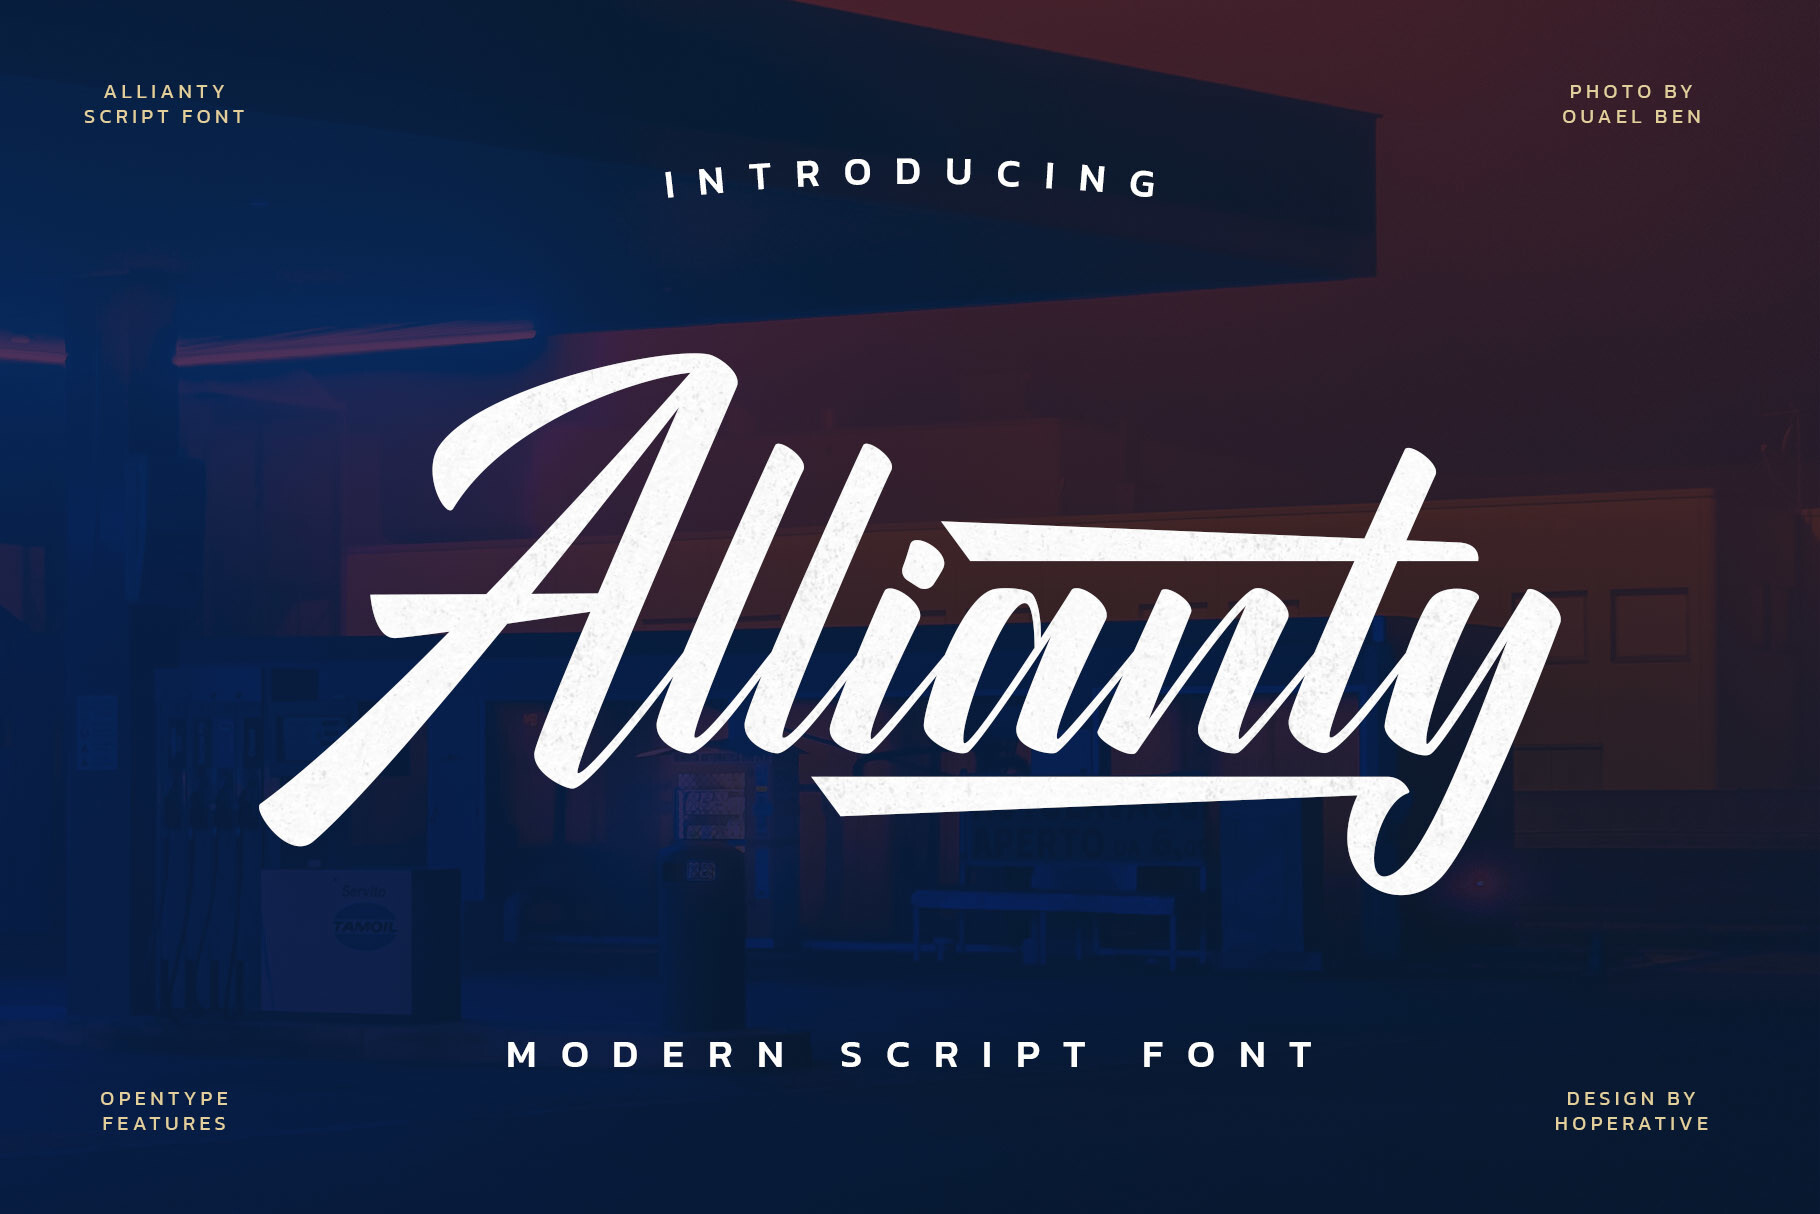 Preview and download Allianty font